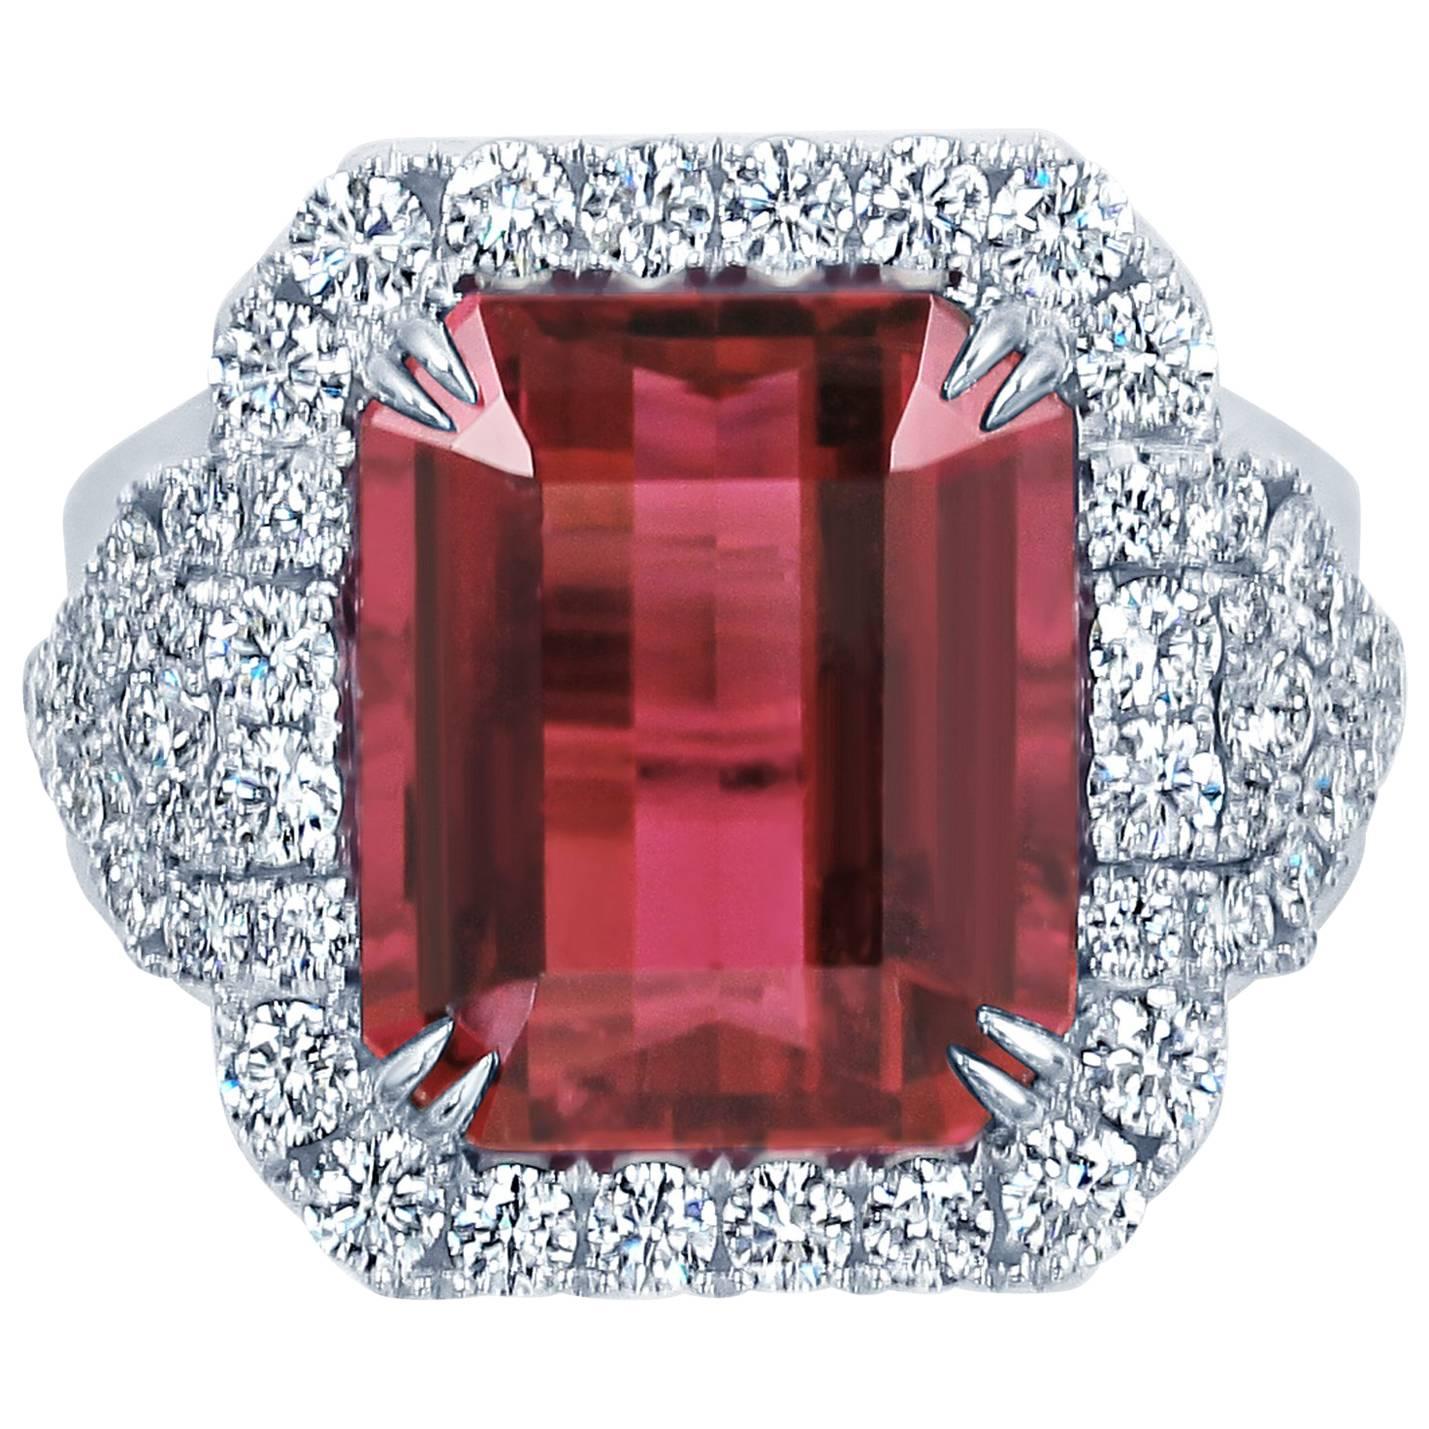 Frederic Sage One of Kind Rubellite and Diamond ring set in 18K White Gold. 

Rubellite 10.19 Carats
Diamond Count 56
Diamond Weight 1.55 Carats